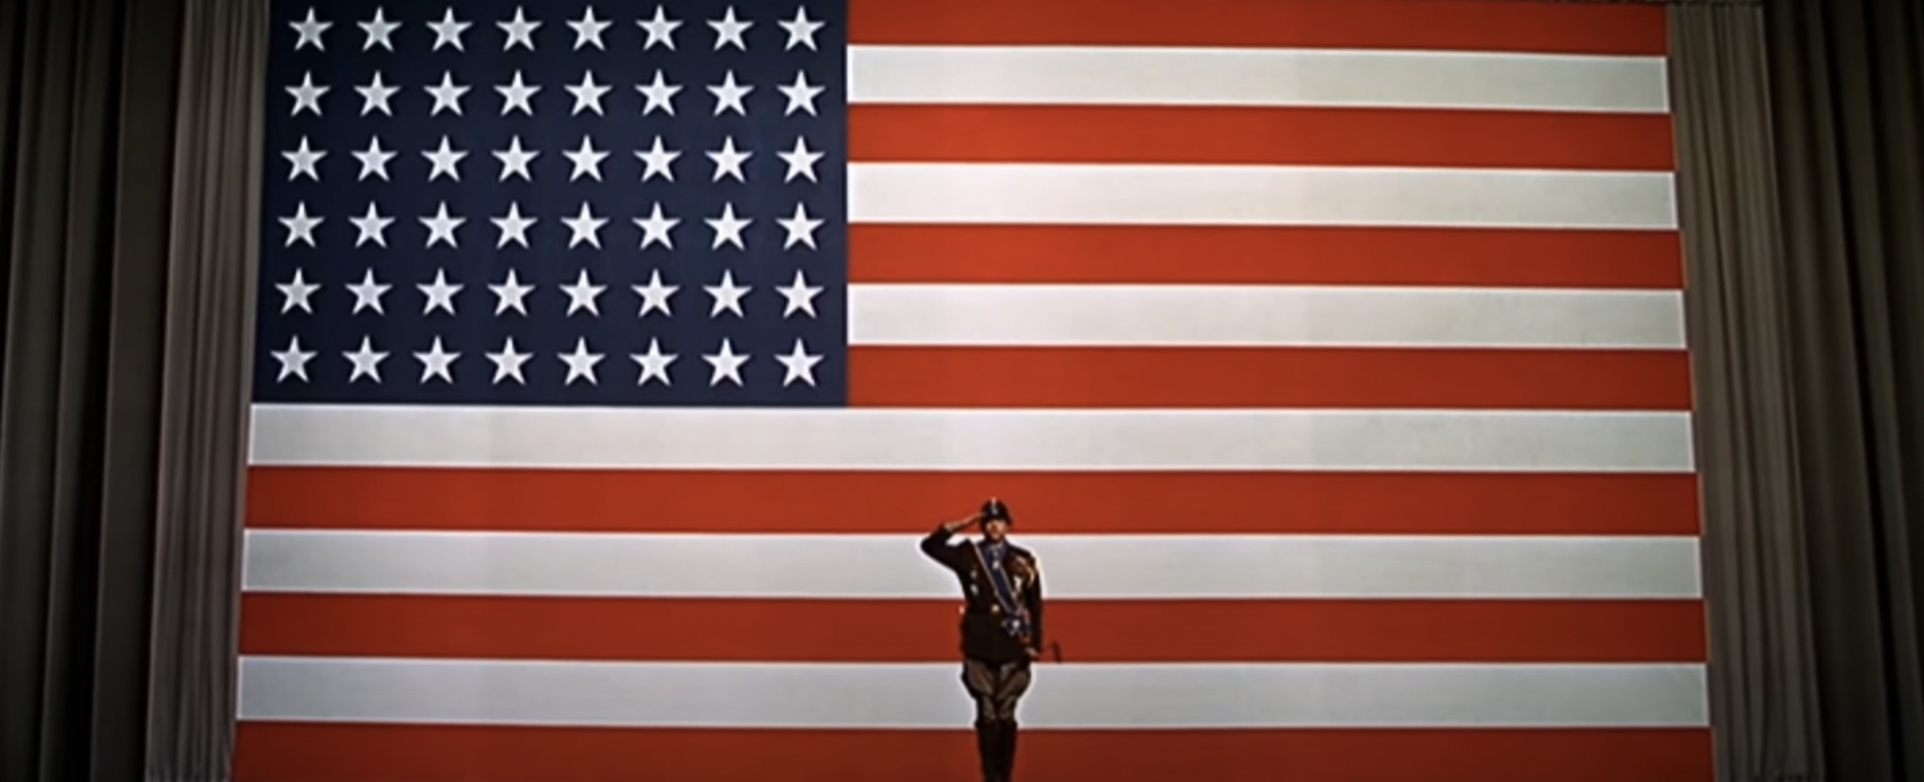 a man salutes in front of the US flag